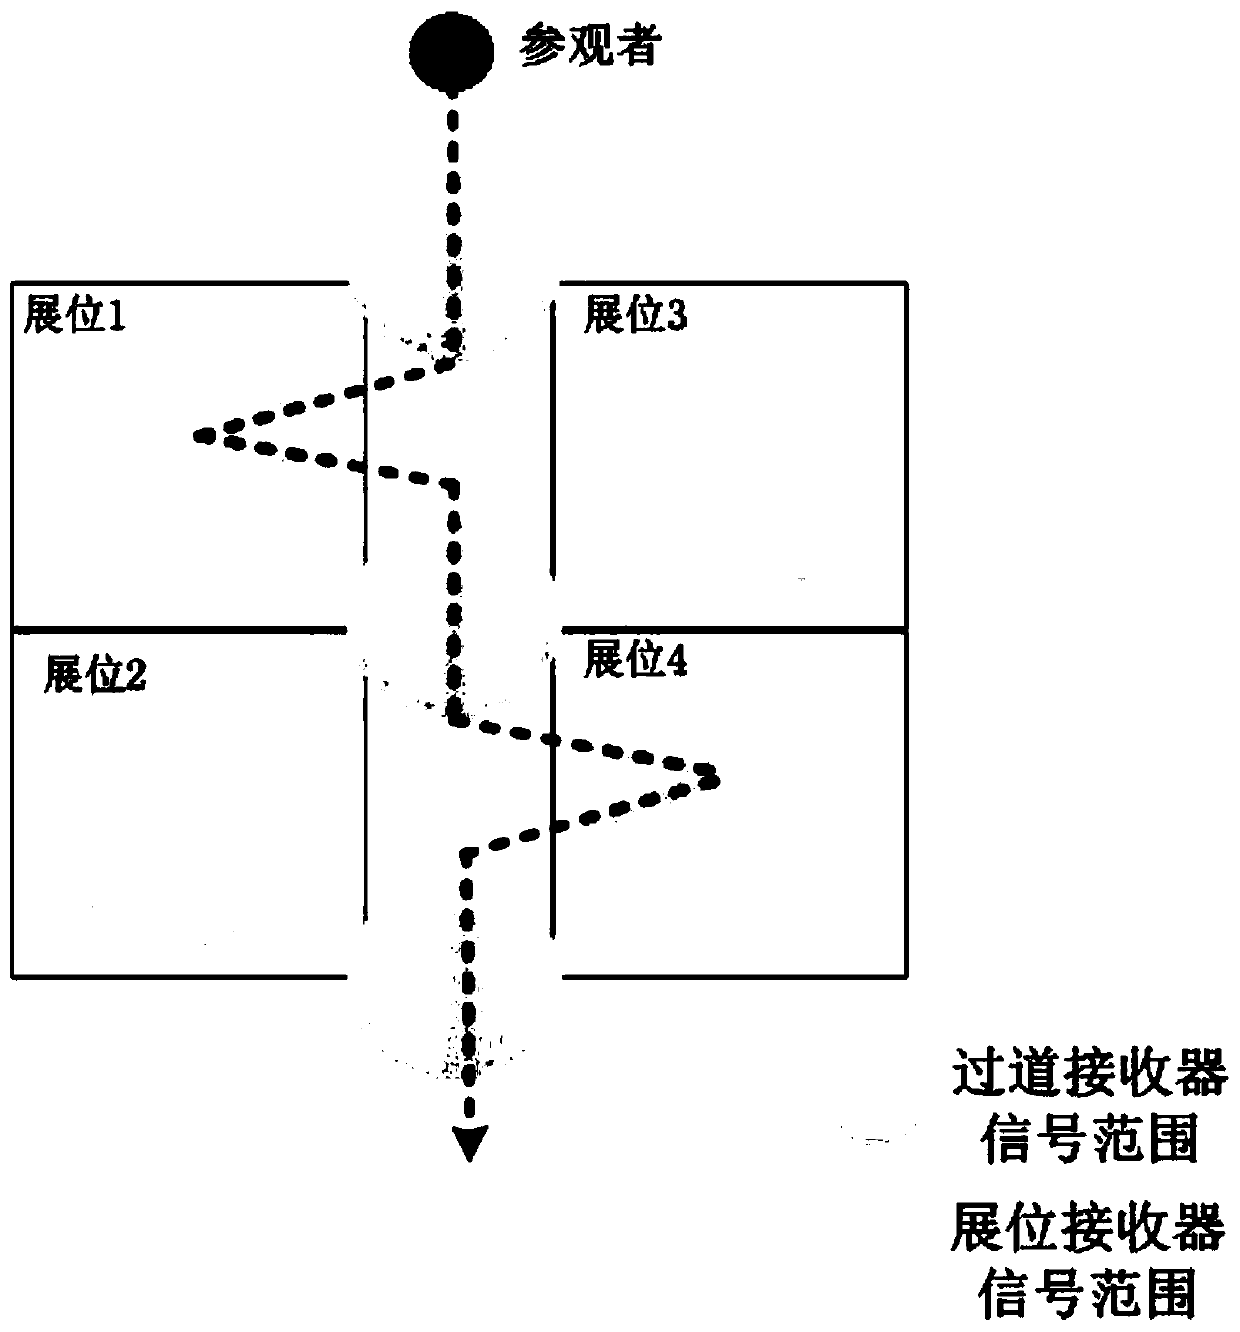 Exhibition personnel positioning method based on ultrahigh radio frequency recognition technology